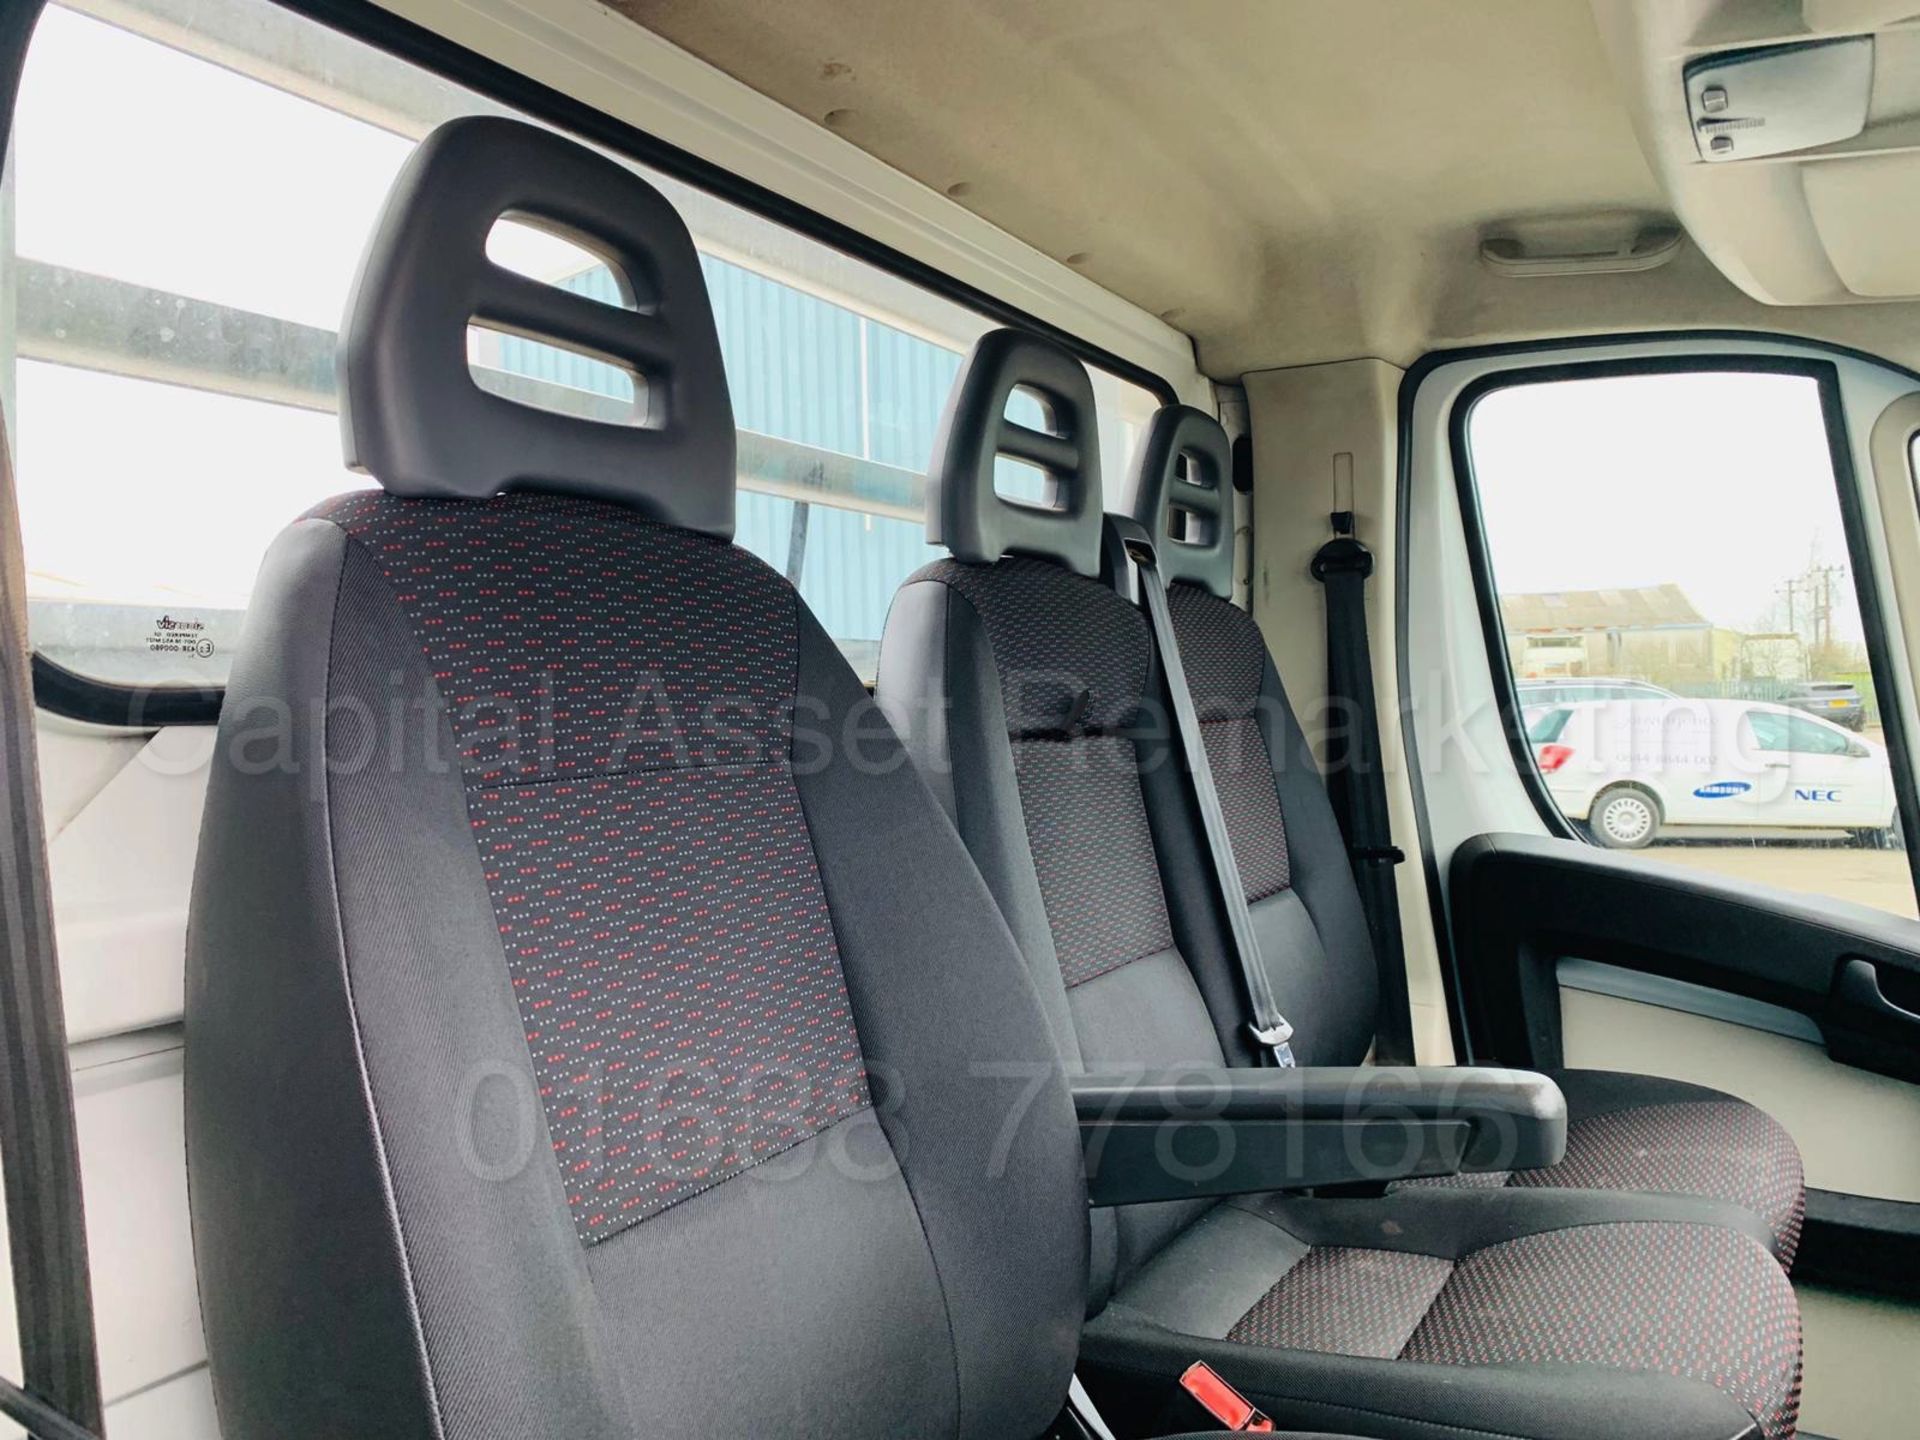 (ON SALE) CITROEN RELAY 35 *L3 - LWB 'ALLOY' DROPSIDE TRUCK* (2016) '2.2 HDI - 130 BHP' *LOW MILES* - Image 20 of 27